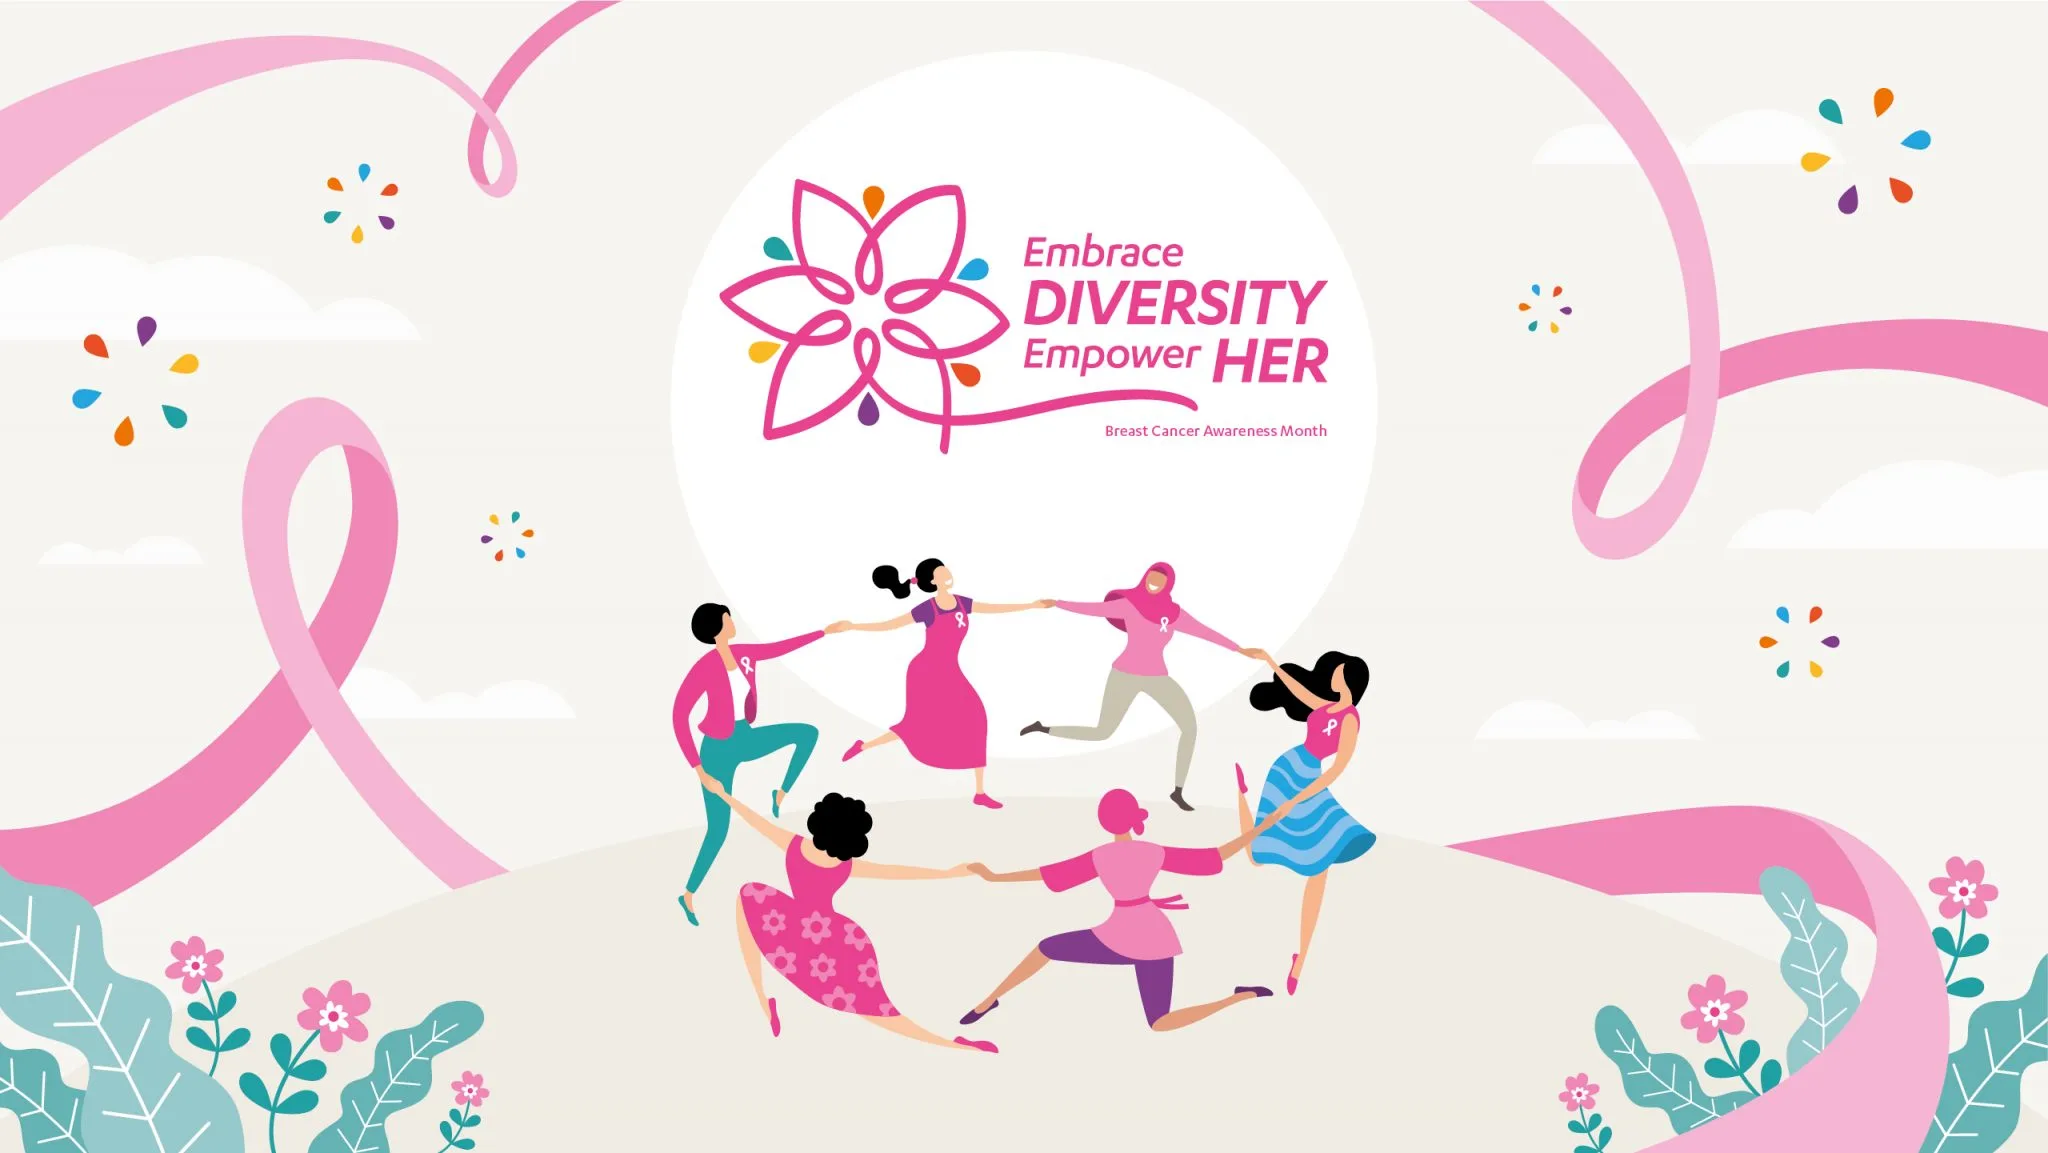 Embrace Diversity, Empower Her